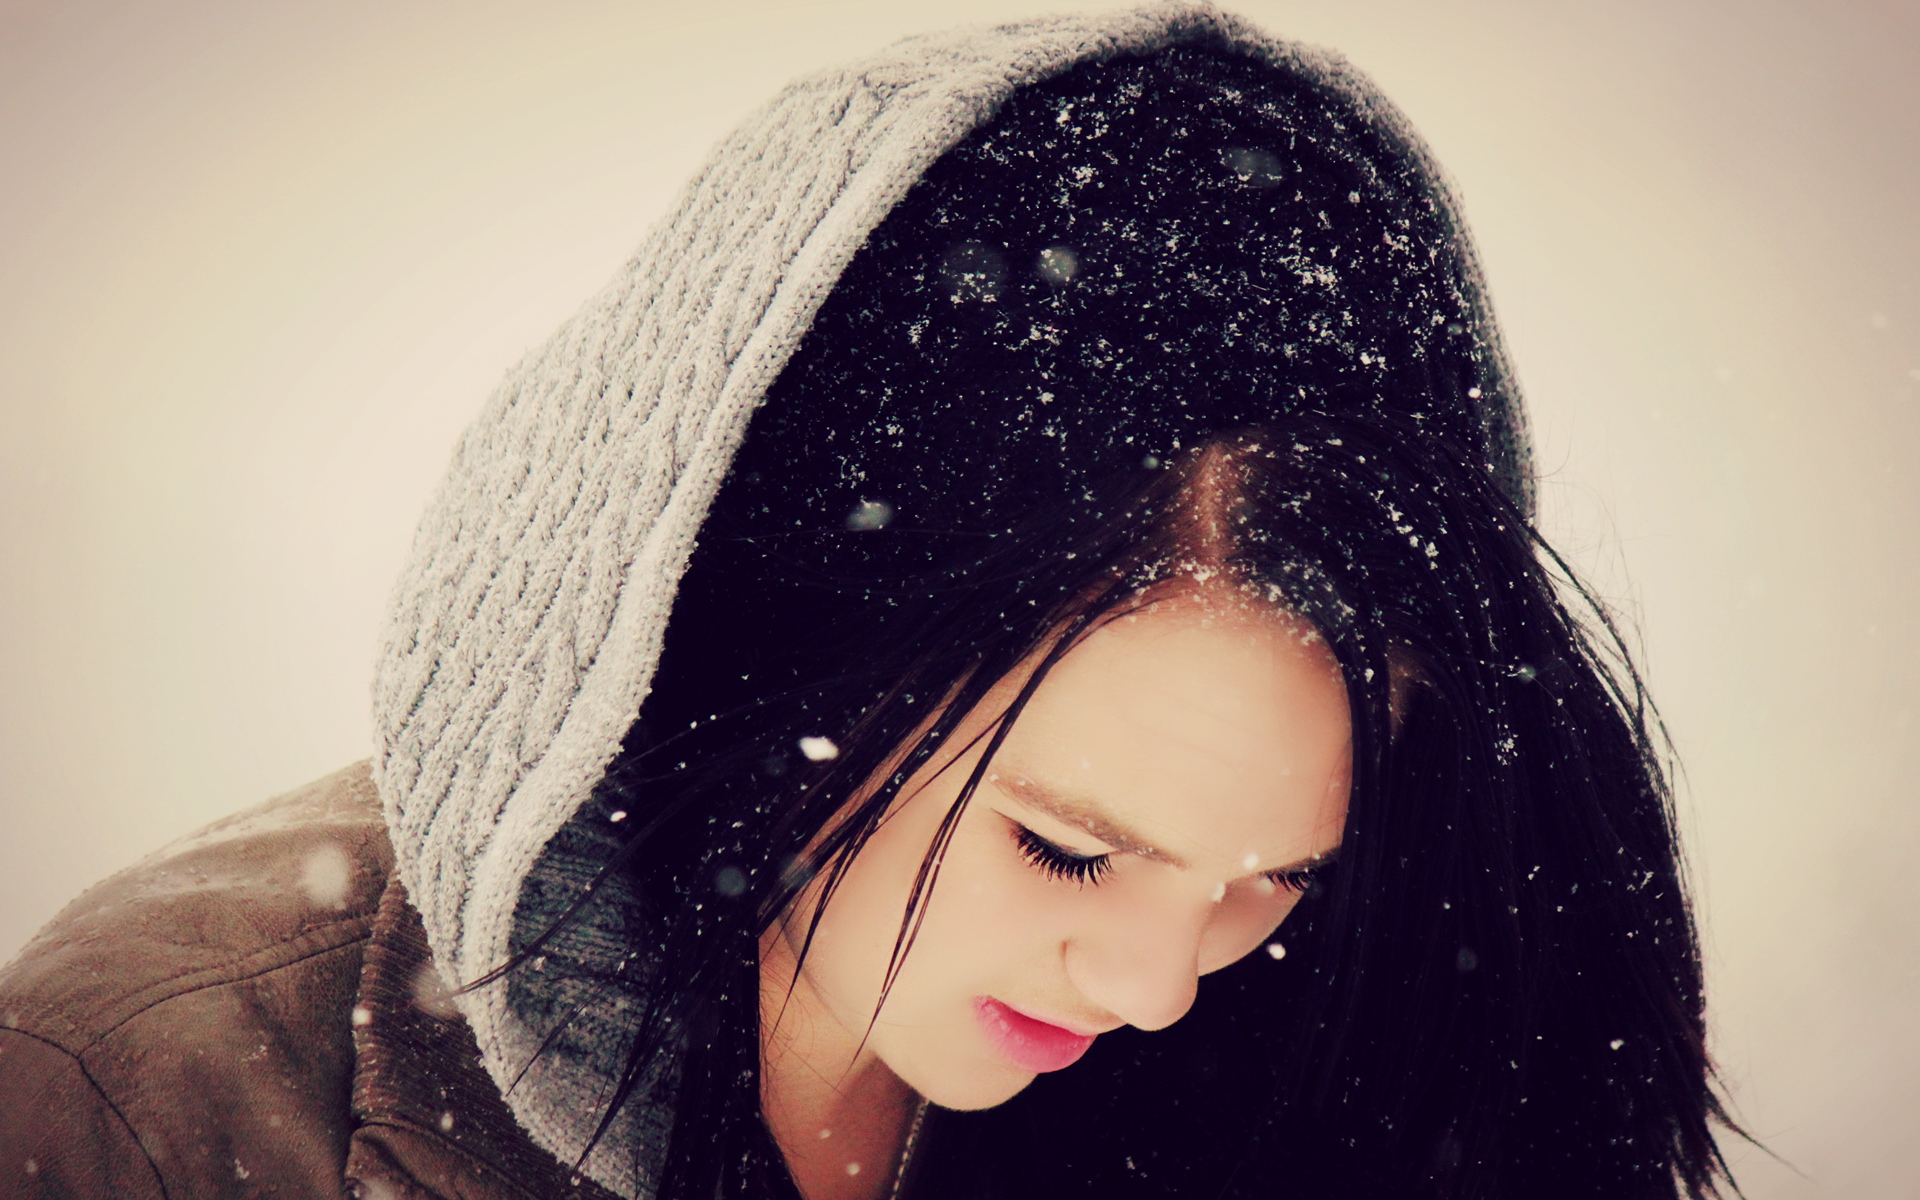 Snow All Over the Upset Girls Head, When Will She Cheer Up and other